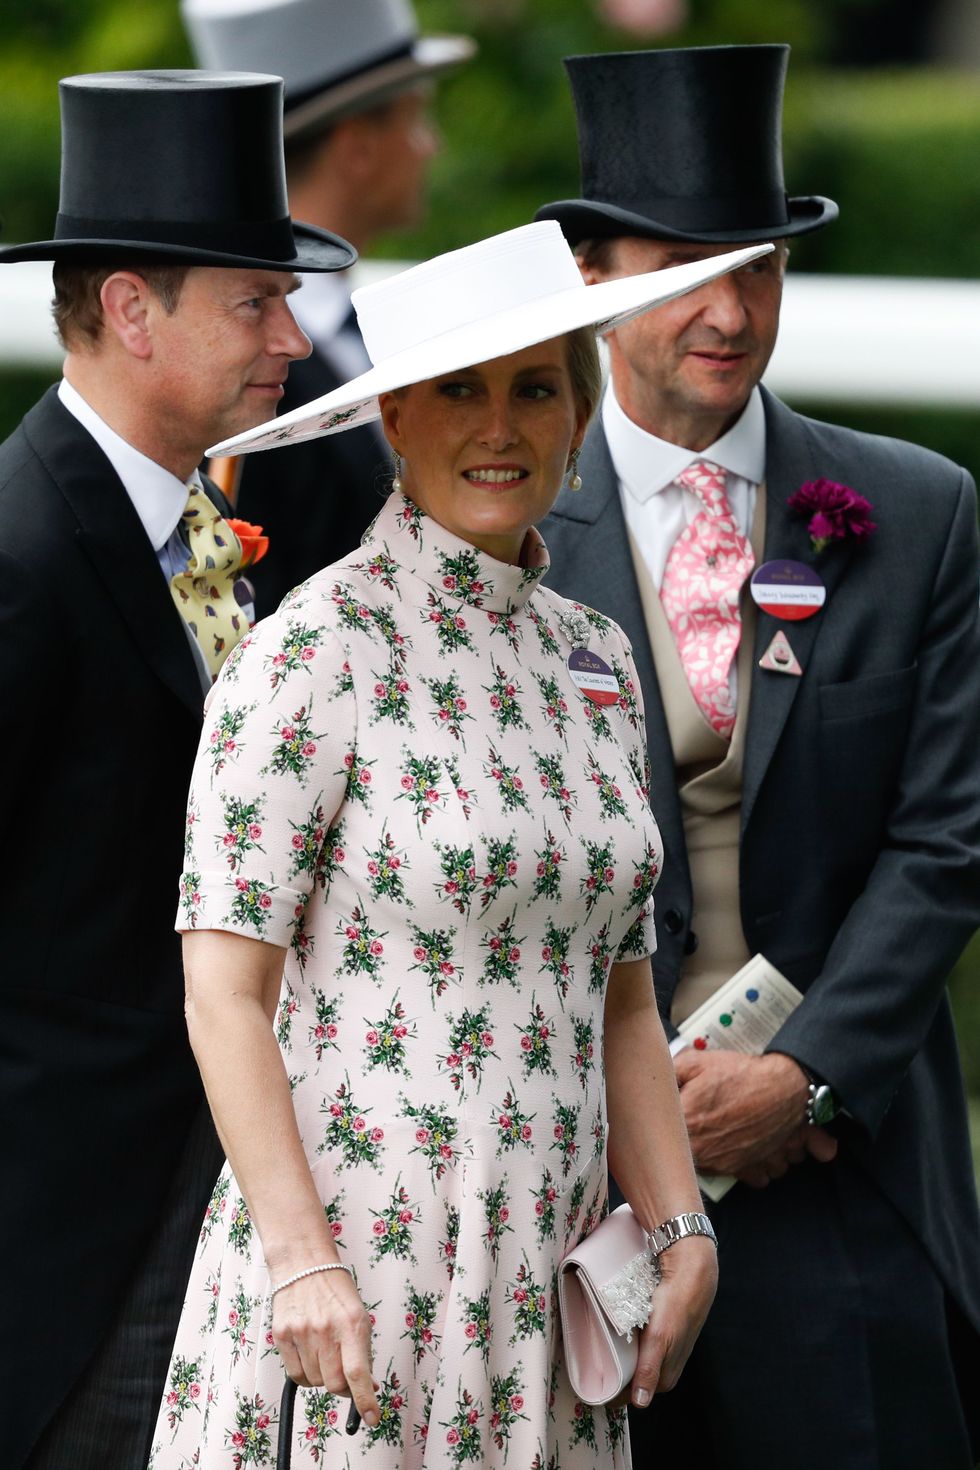 The Royal Family on Day 1 of Royal Ascot 2019 in Photos